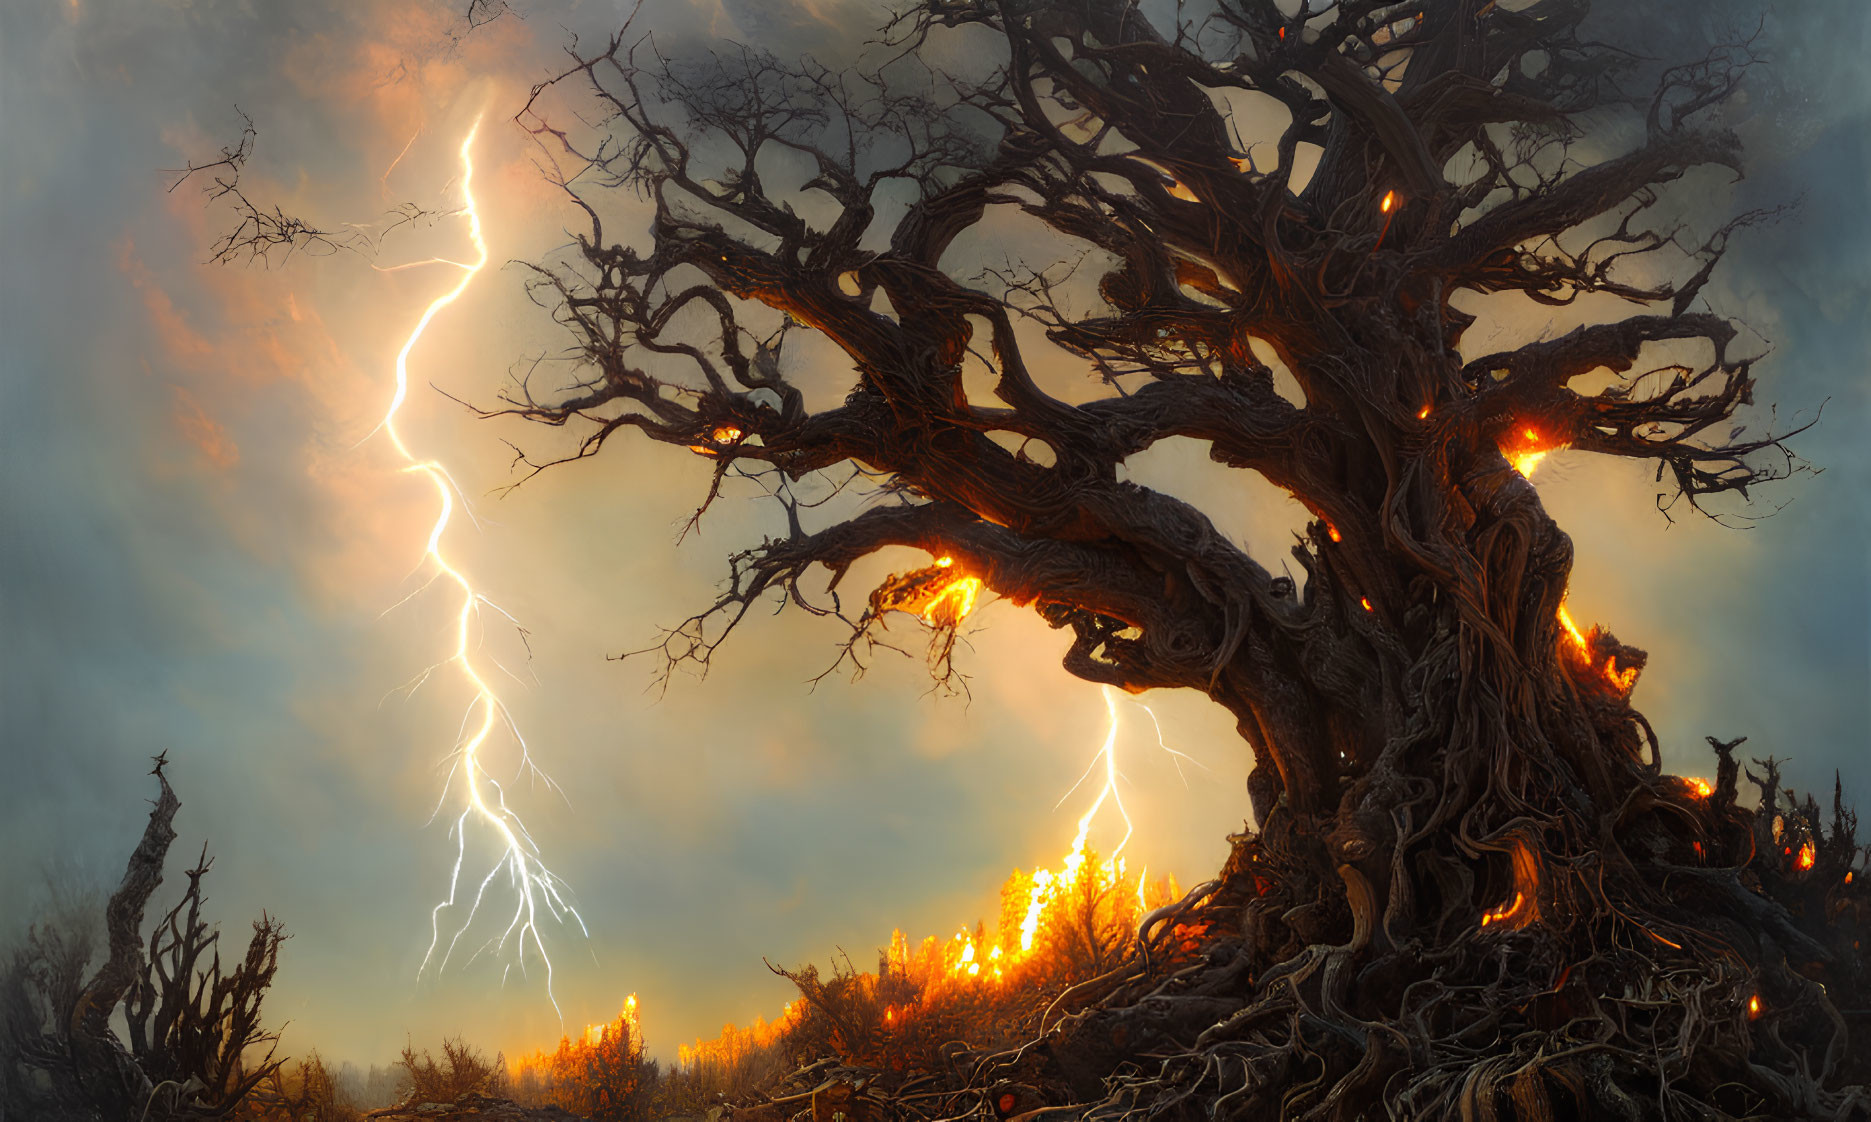 Gnarled tree engulfed in flames with lightning in fiery landscape